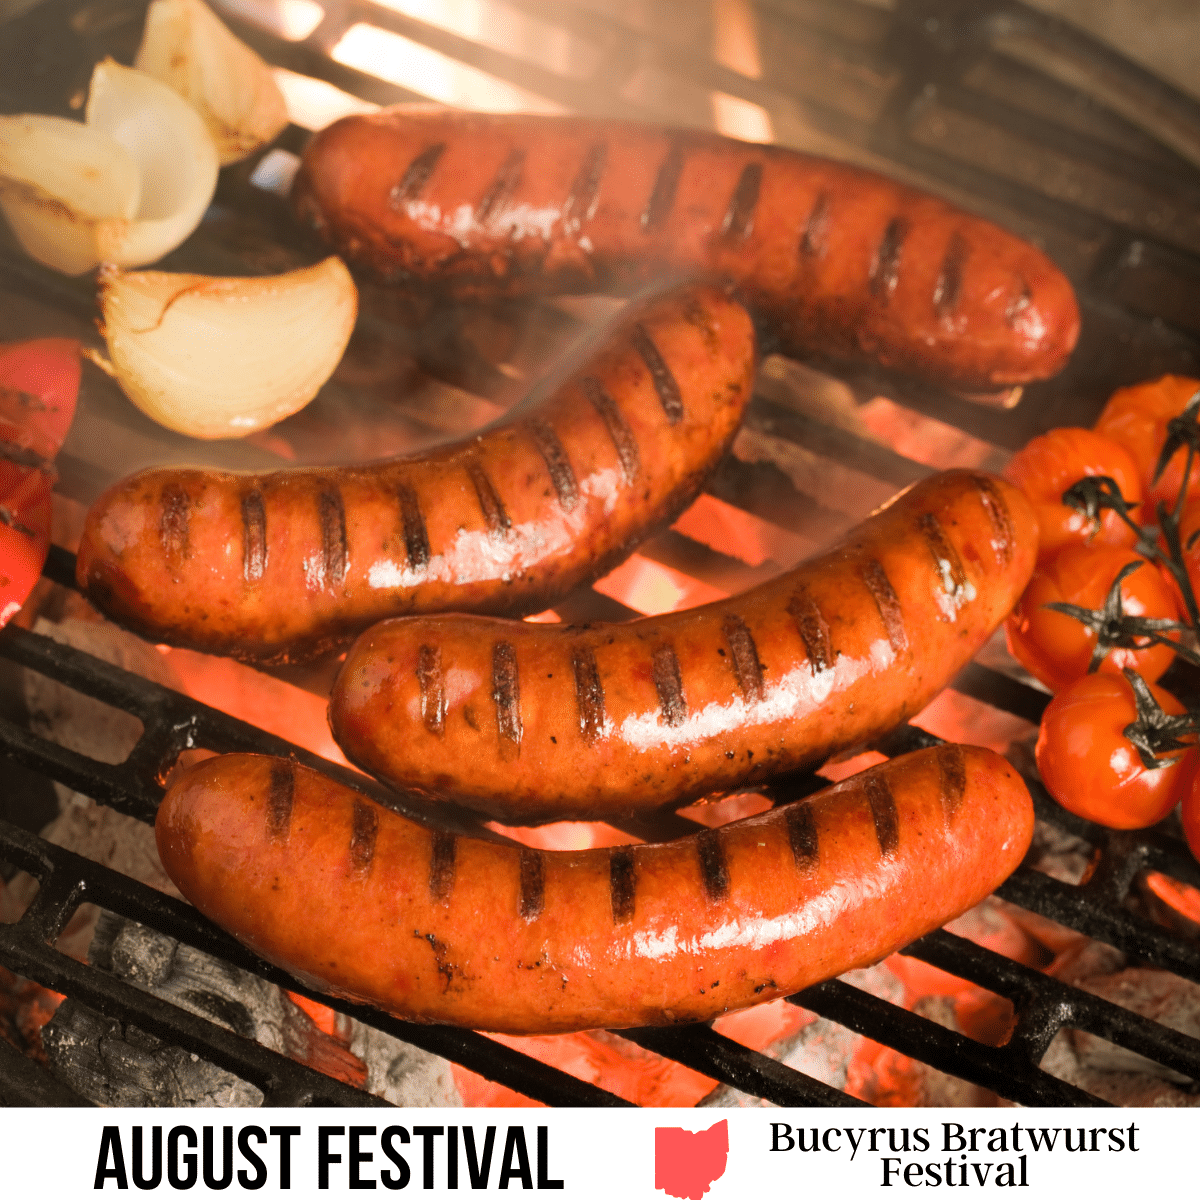 A square image of several sausages on a grill. A white strip across the bottom has text August Festival Bucyrus Bratwurst Festival.